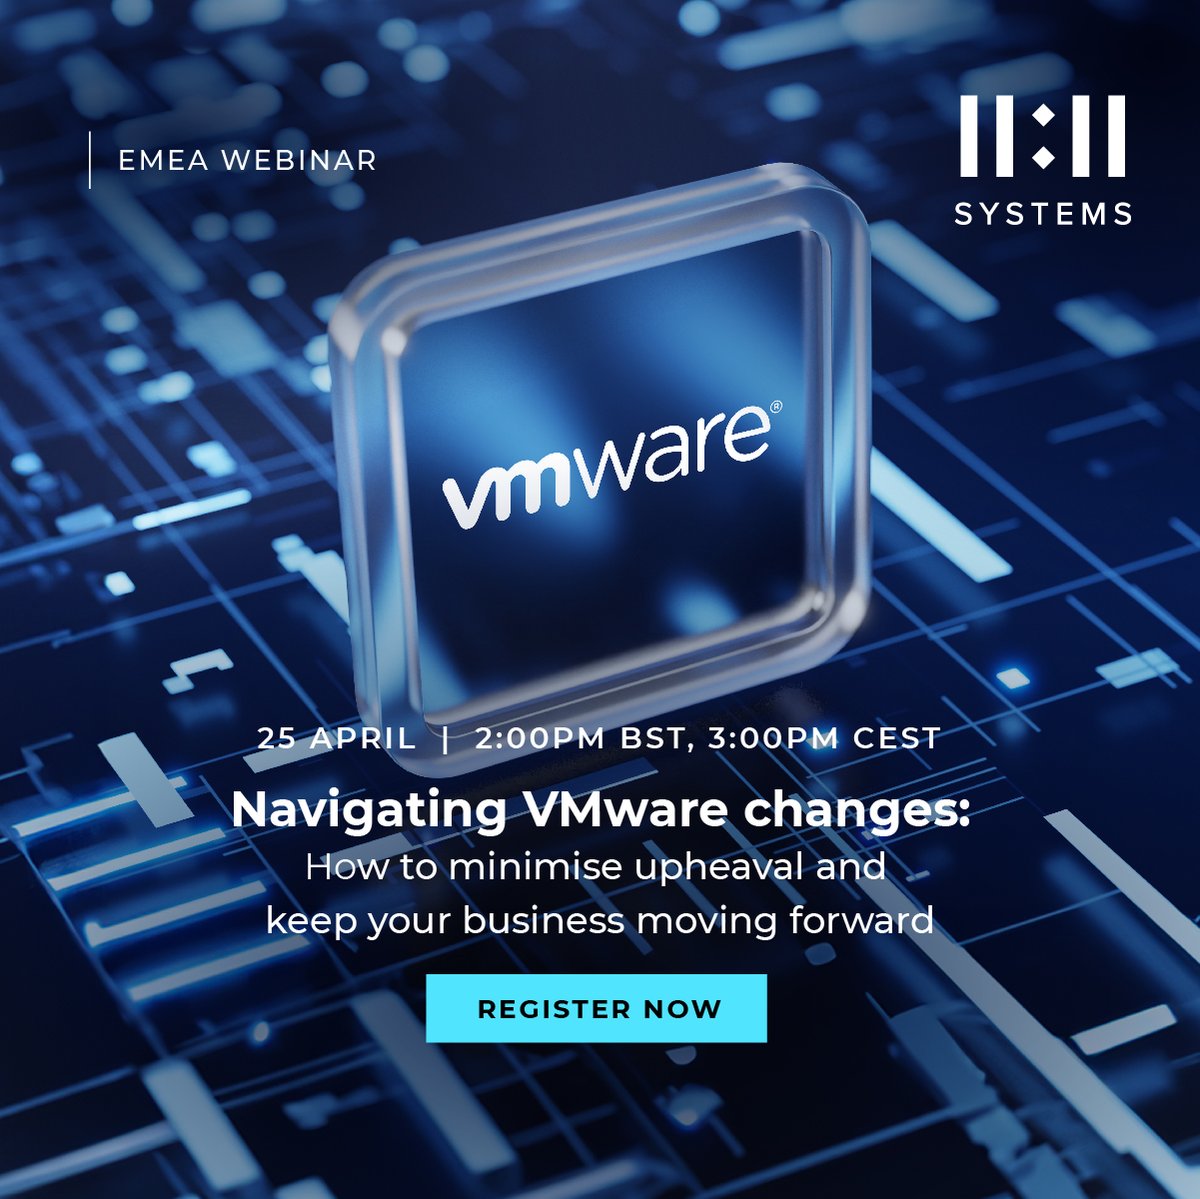 Don't miss our upcoming presentation on Thursday, 25 April, when we’ll discus how to take a strategic approach to VMware changes that helps to future-proof your business and explore the best cloud options. Learn more and register for the EMEA session: 1111systems.com/wb-apr-vmware-…